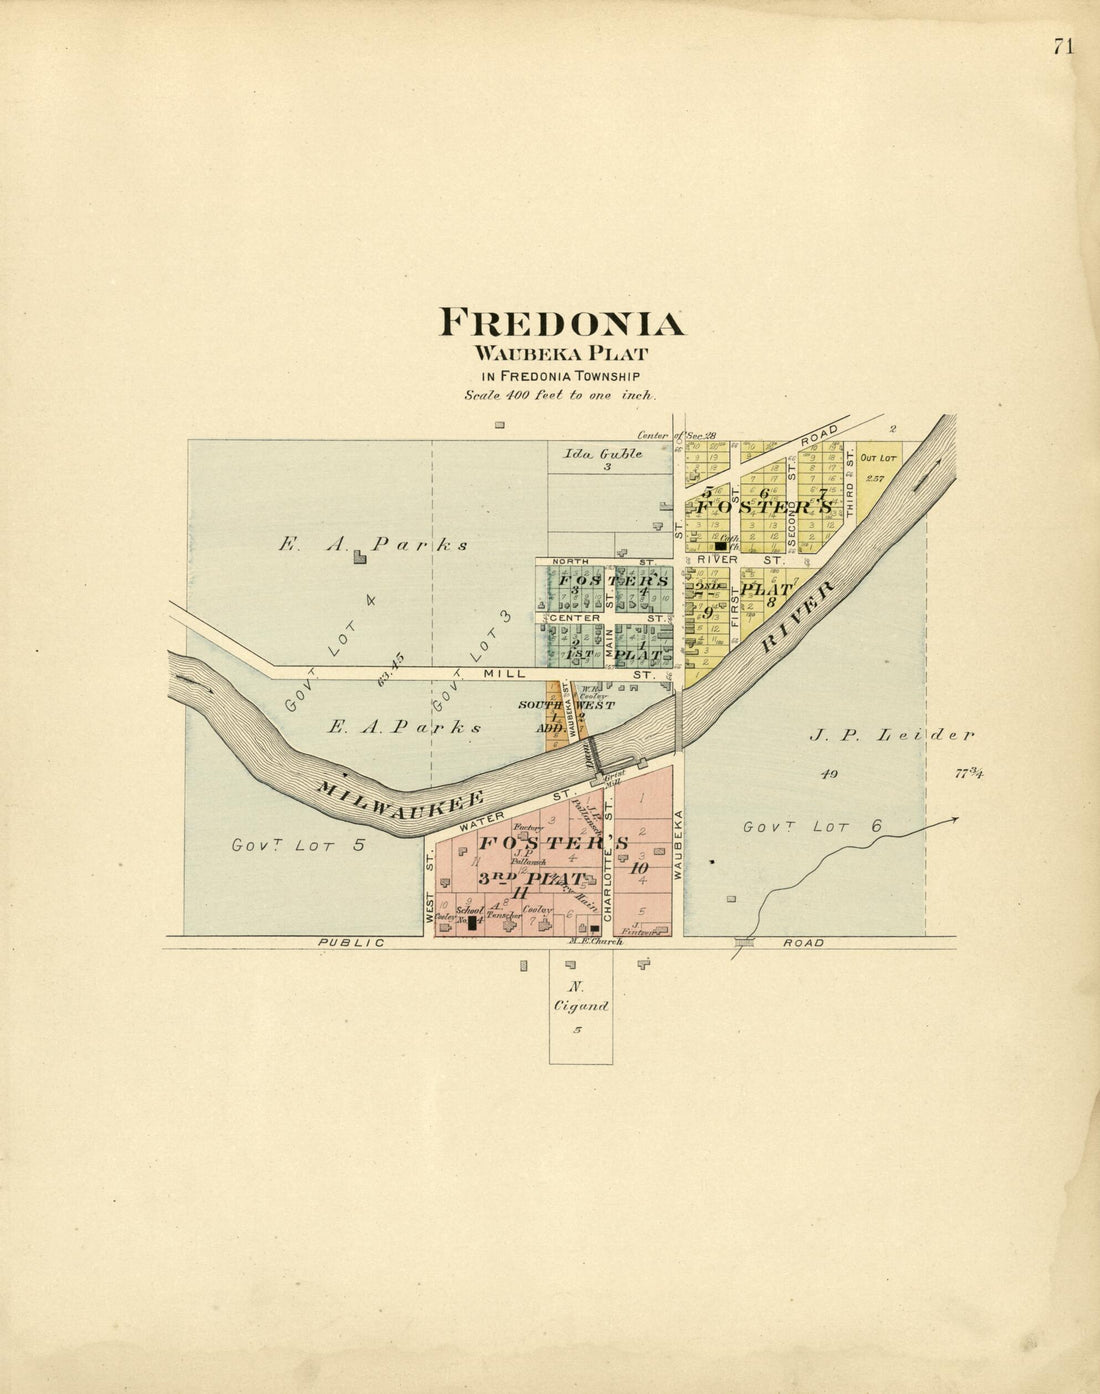 This old map of Fredonia from Plat Book of Washington and Ozaukee Counties, Wisconsin from 1915 was created by Albert Volk in 1915